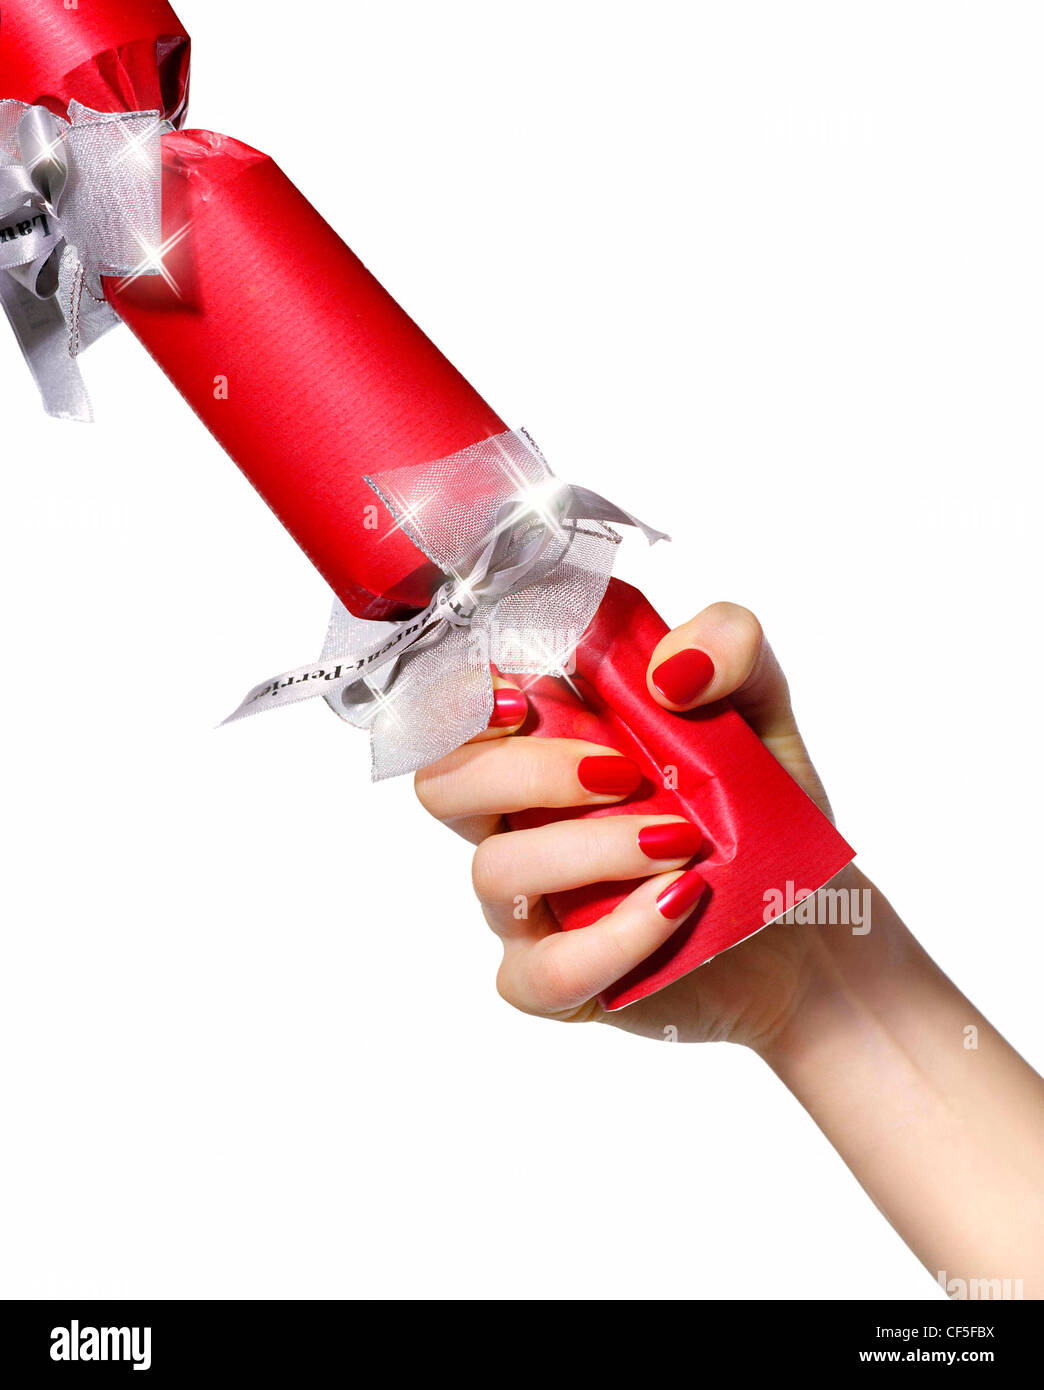 Female wearing bright red nail varnish pulling a red Christmas cracker with silver ribbon Stock Photo